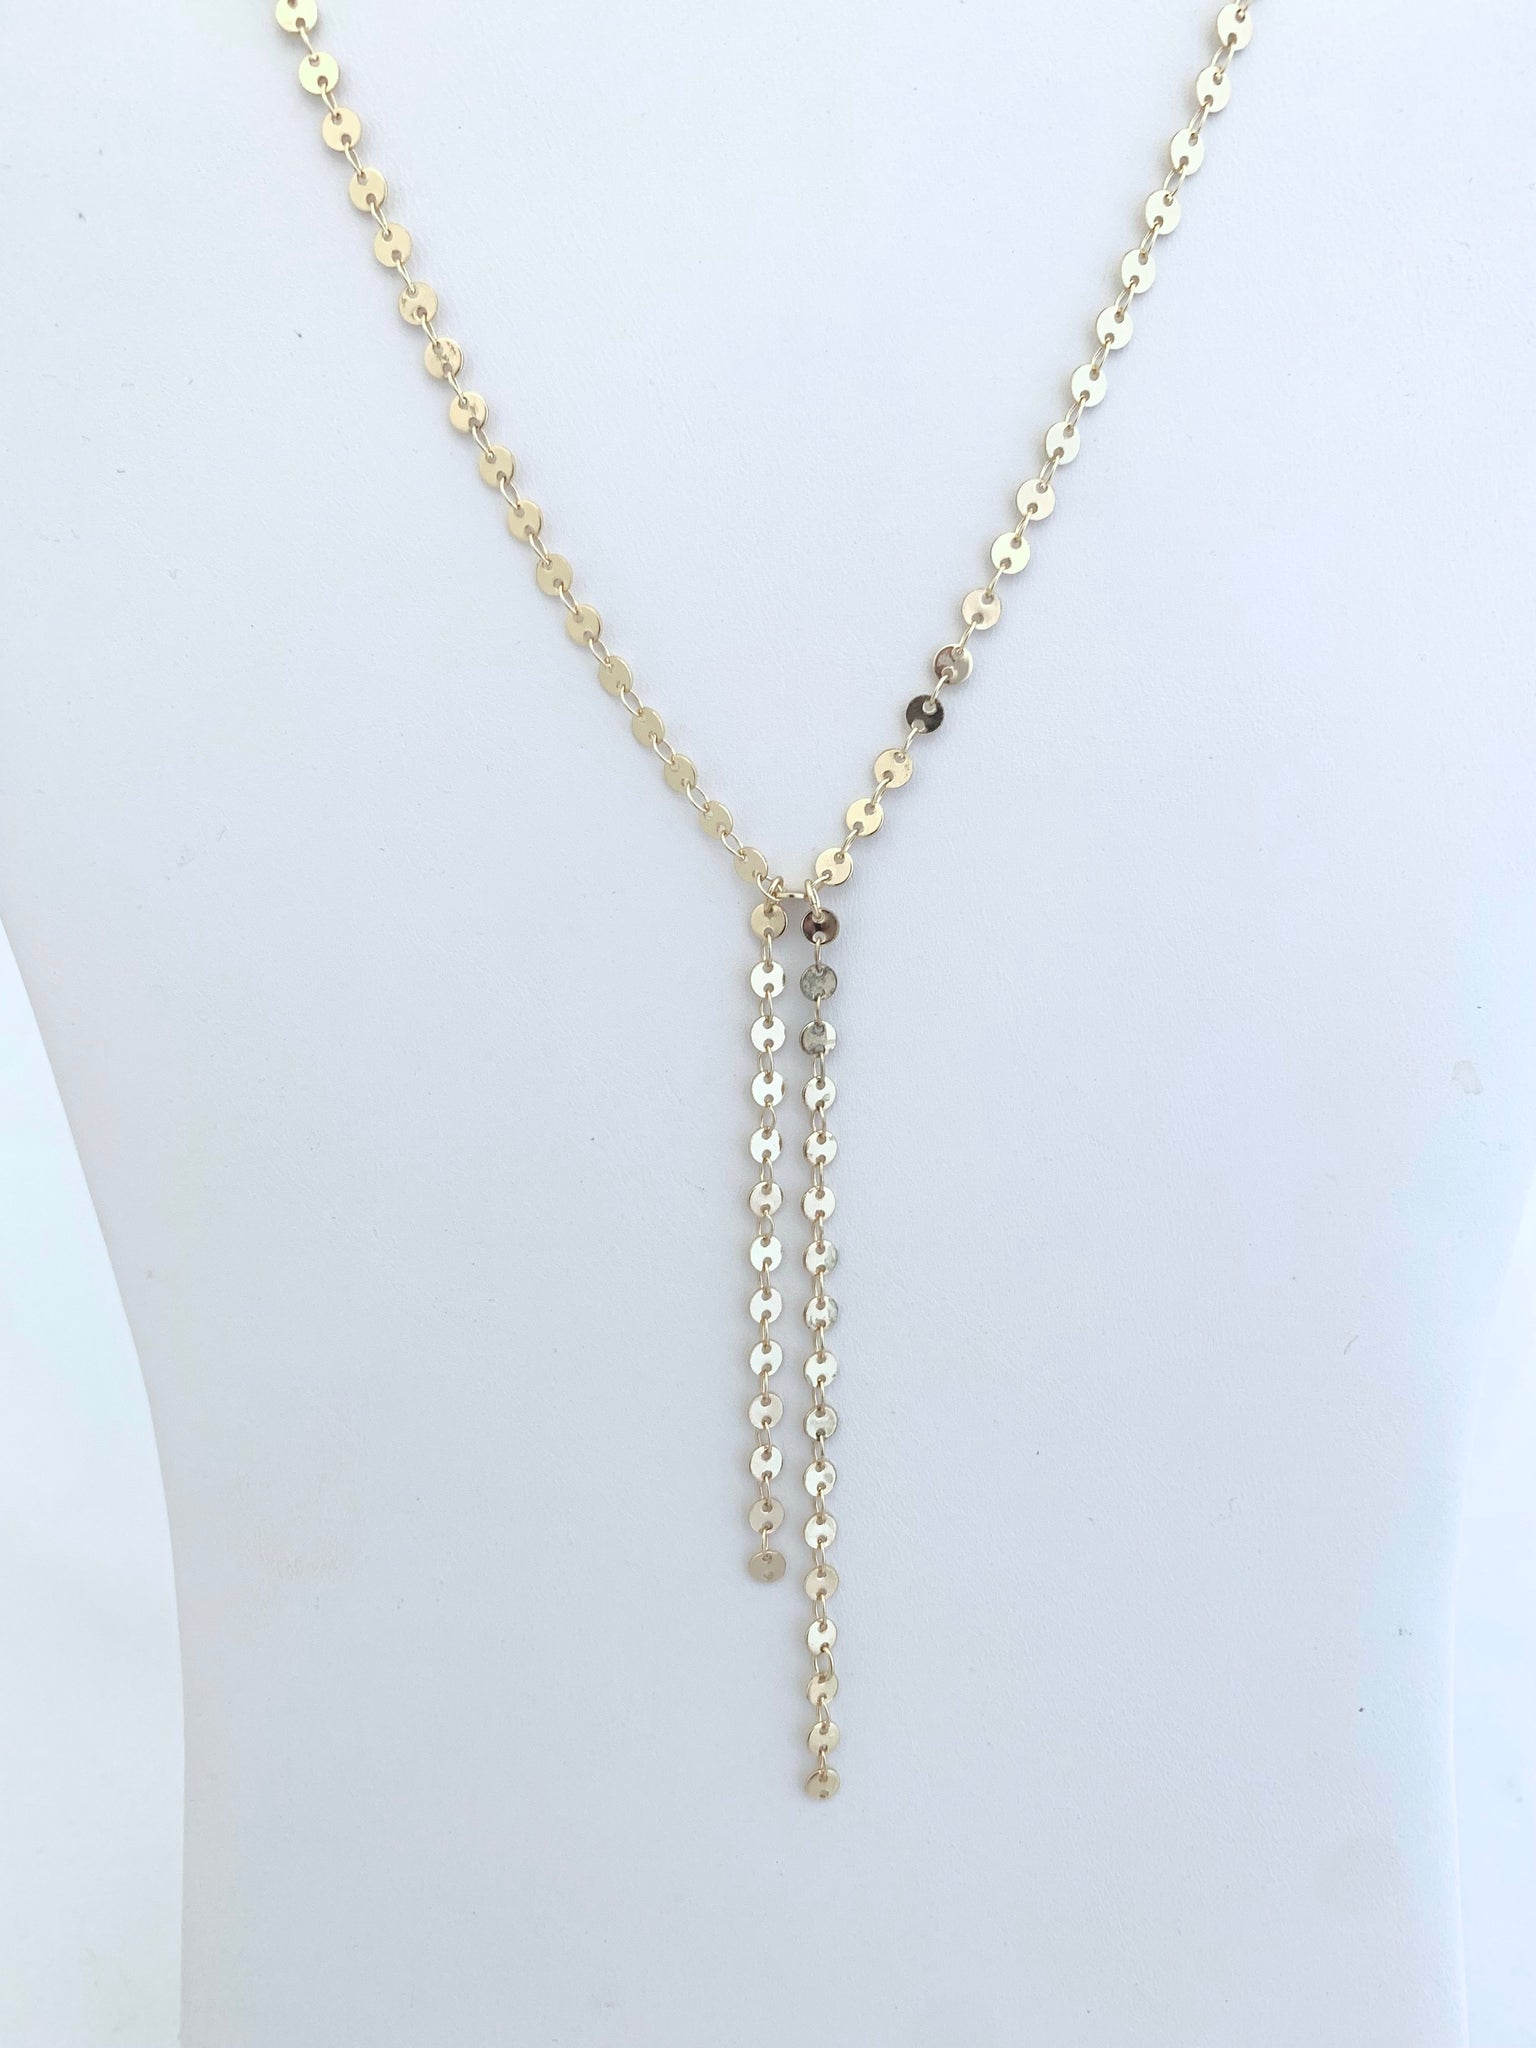 Shiny Gold Y Chain Faux Lariat Necklace